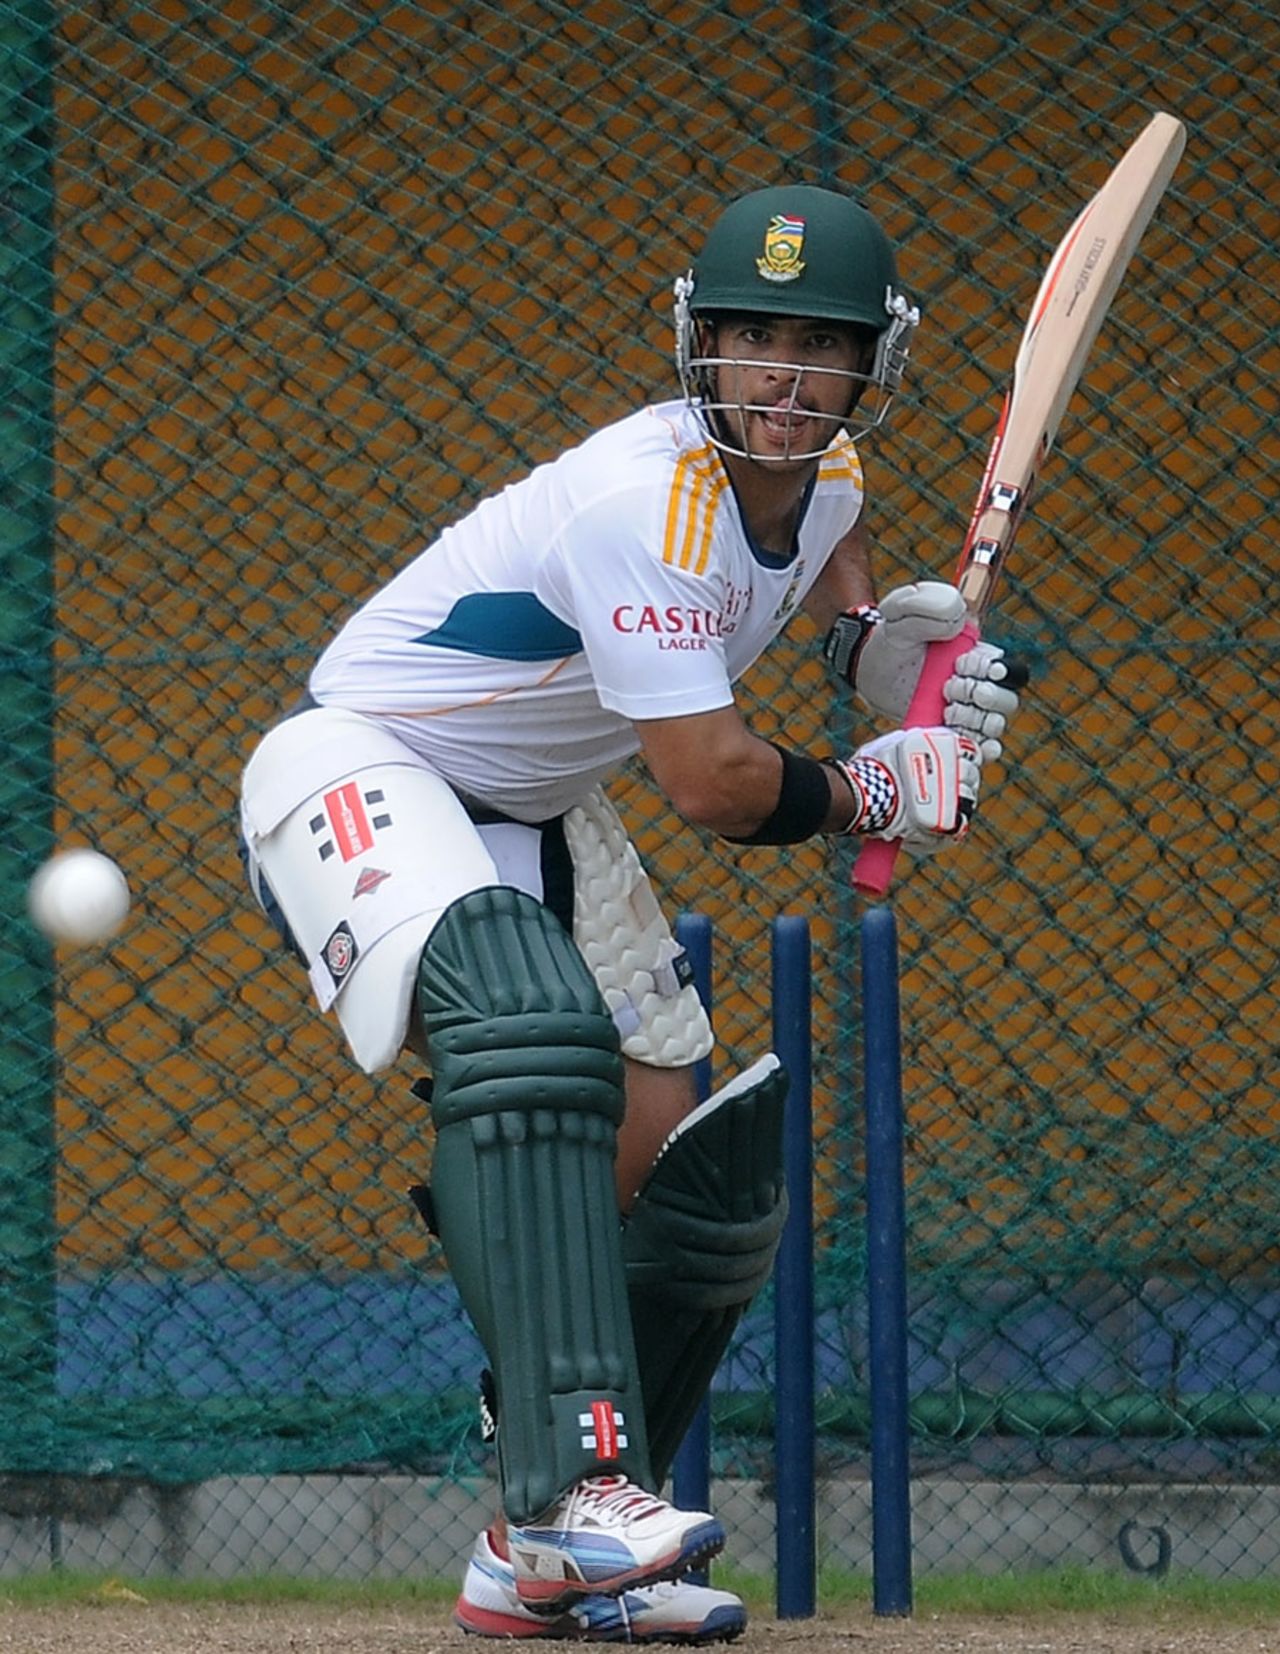 JP Duminy plays a shot during a practice session, Colombo, July 19, 2013